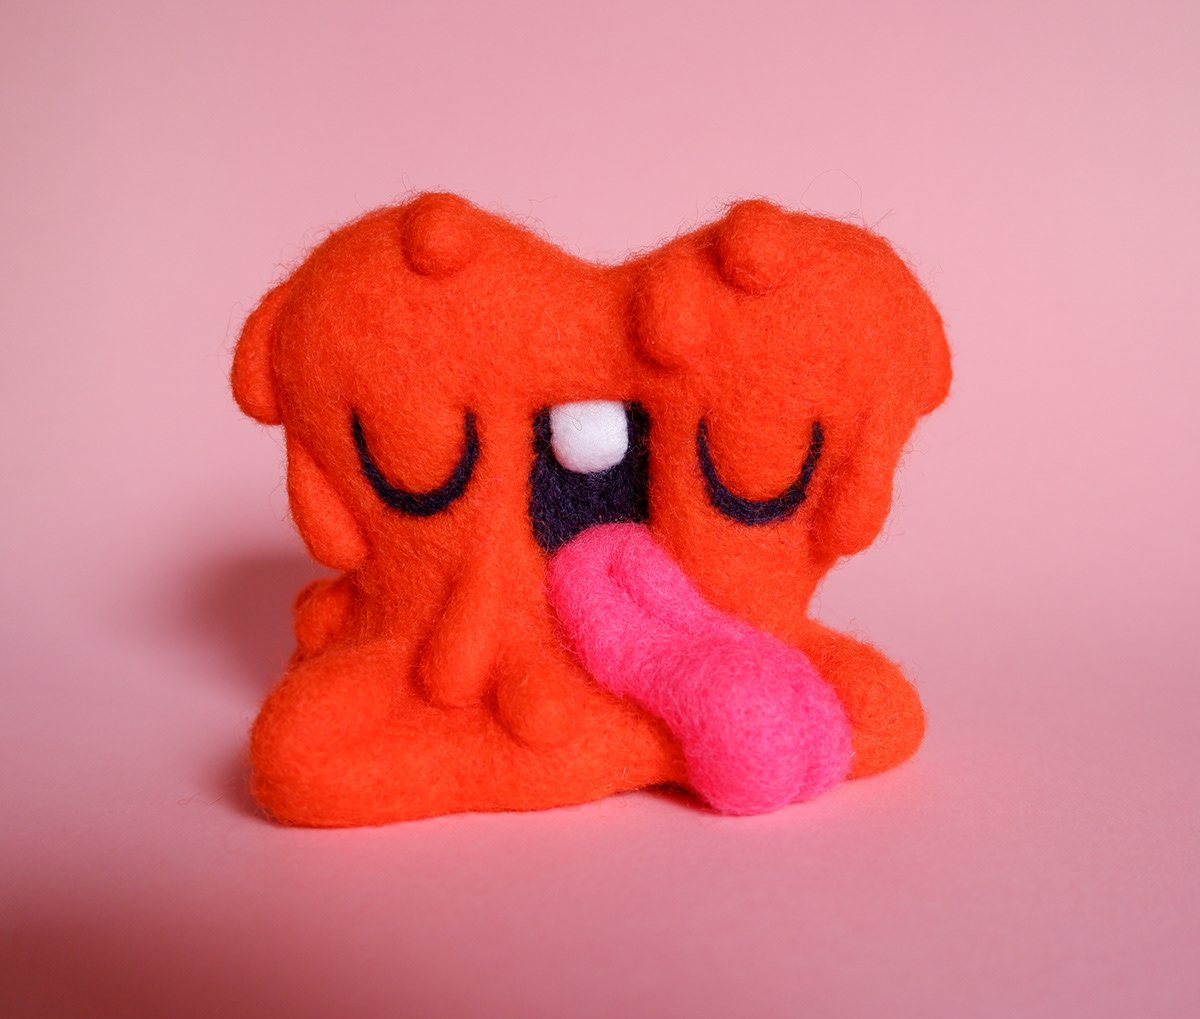 art toy droolwool melting heart soft sculpture Valentine's Day